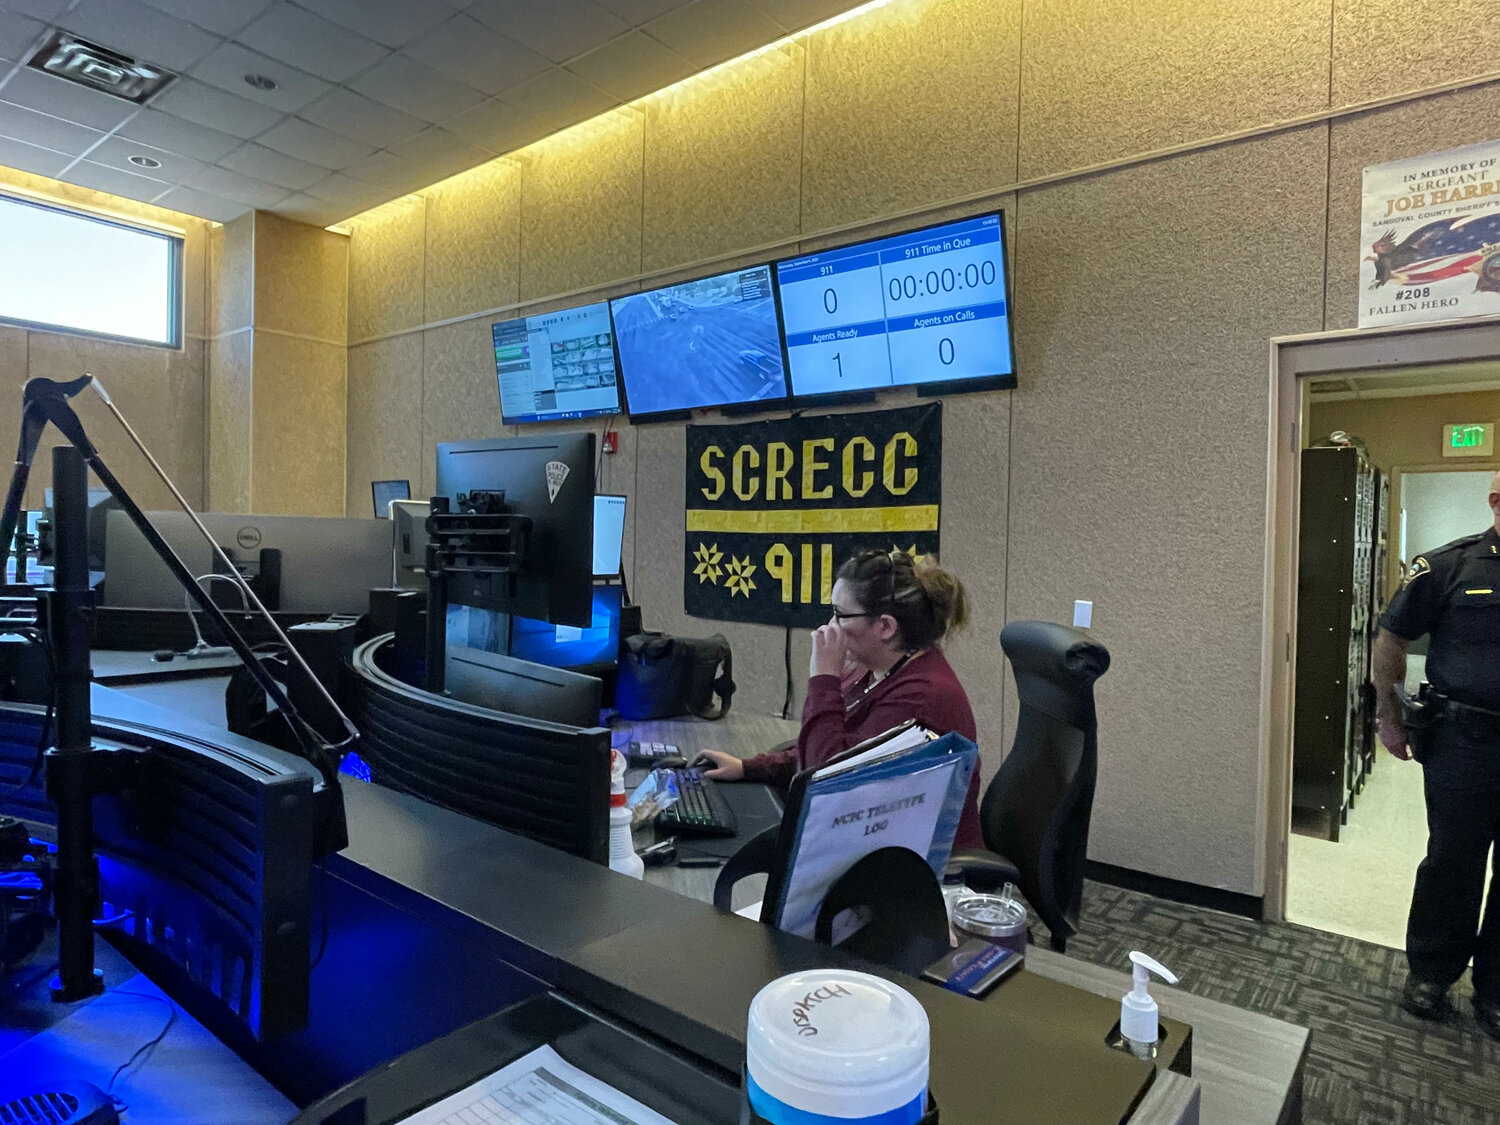 The Sandoval County Regional Emergency Communications Center operates under a Joint Powers Agreement that includes Corrales. (T.S. Last/Corrales Comment)